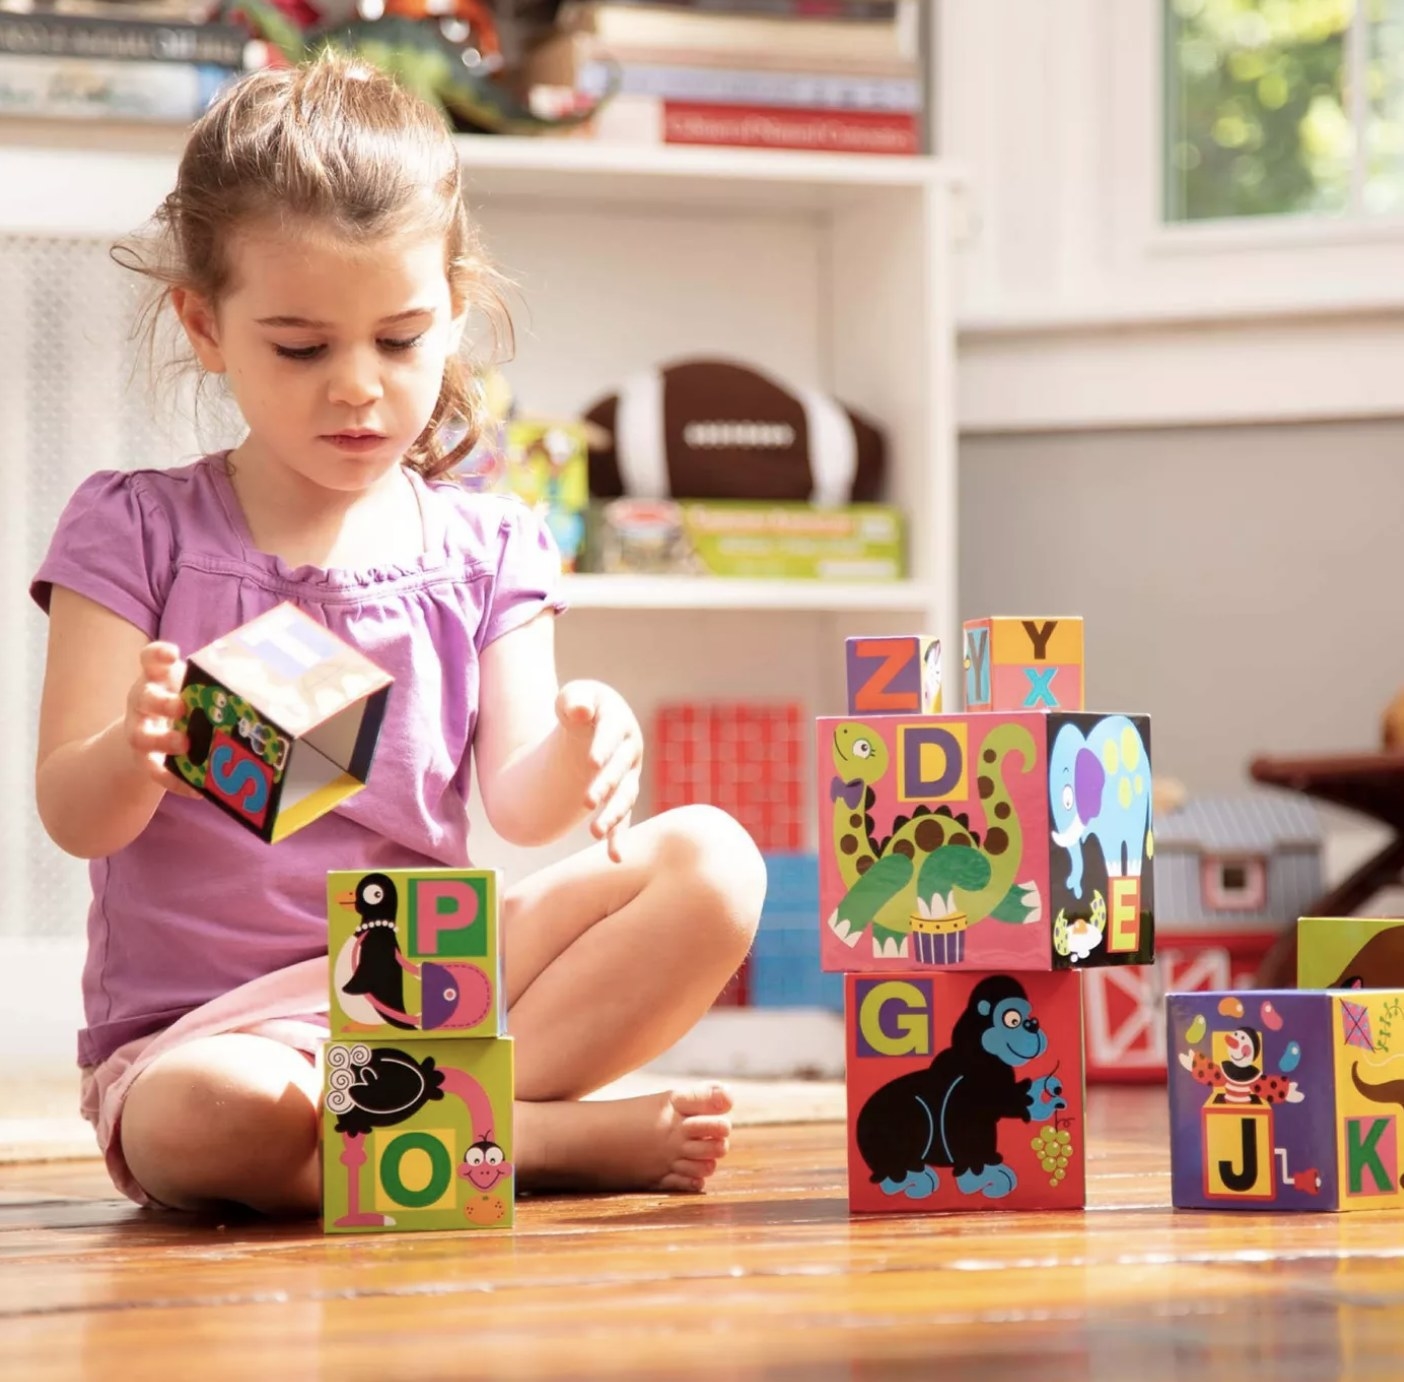 Child is playing with colorful nesting blocks